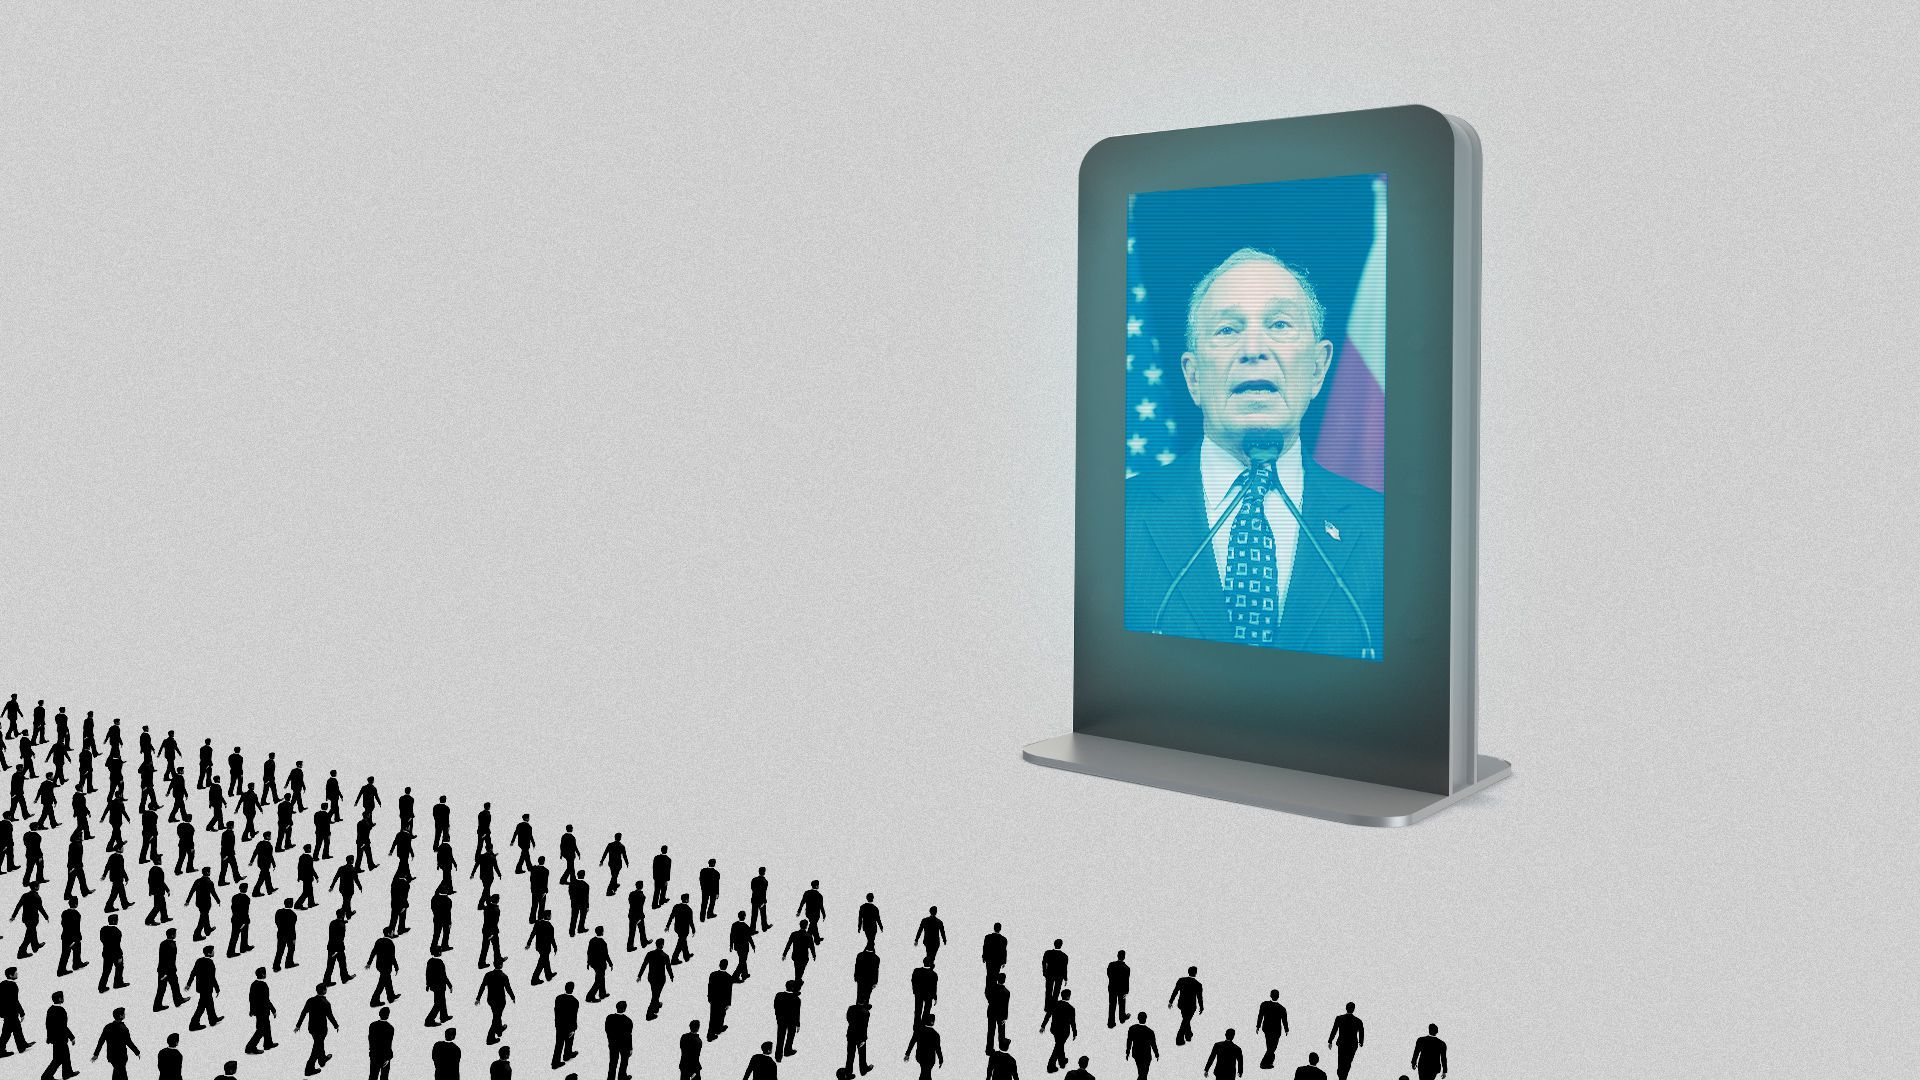 Illustration of a crowd of people marching towards a giant screen showing Michael Bloomberg. 